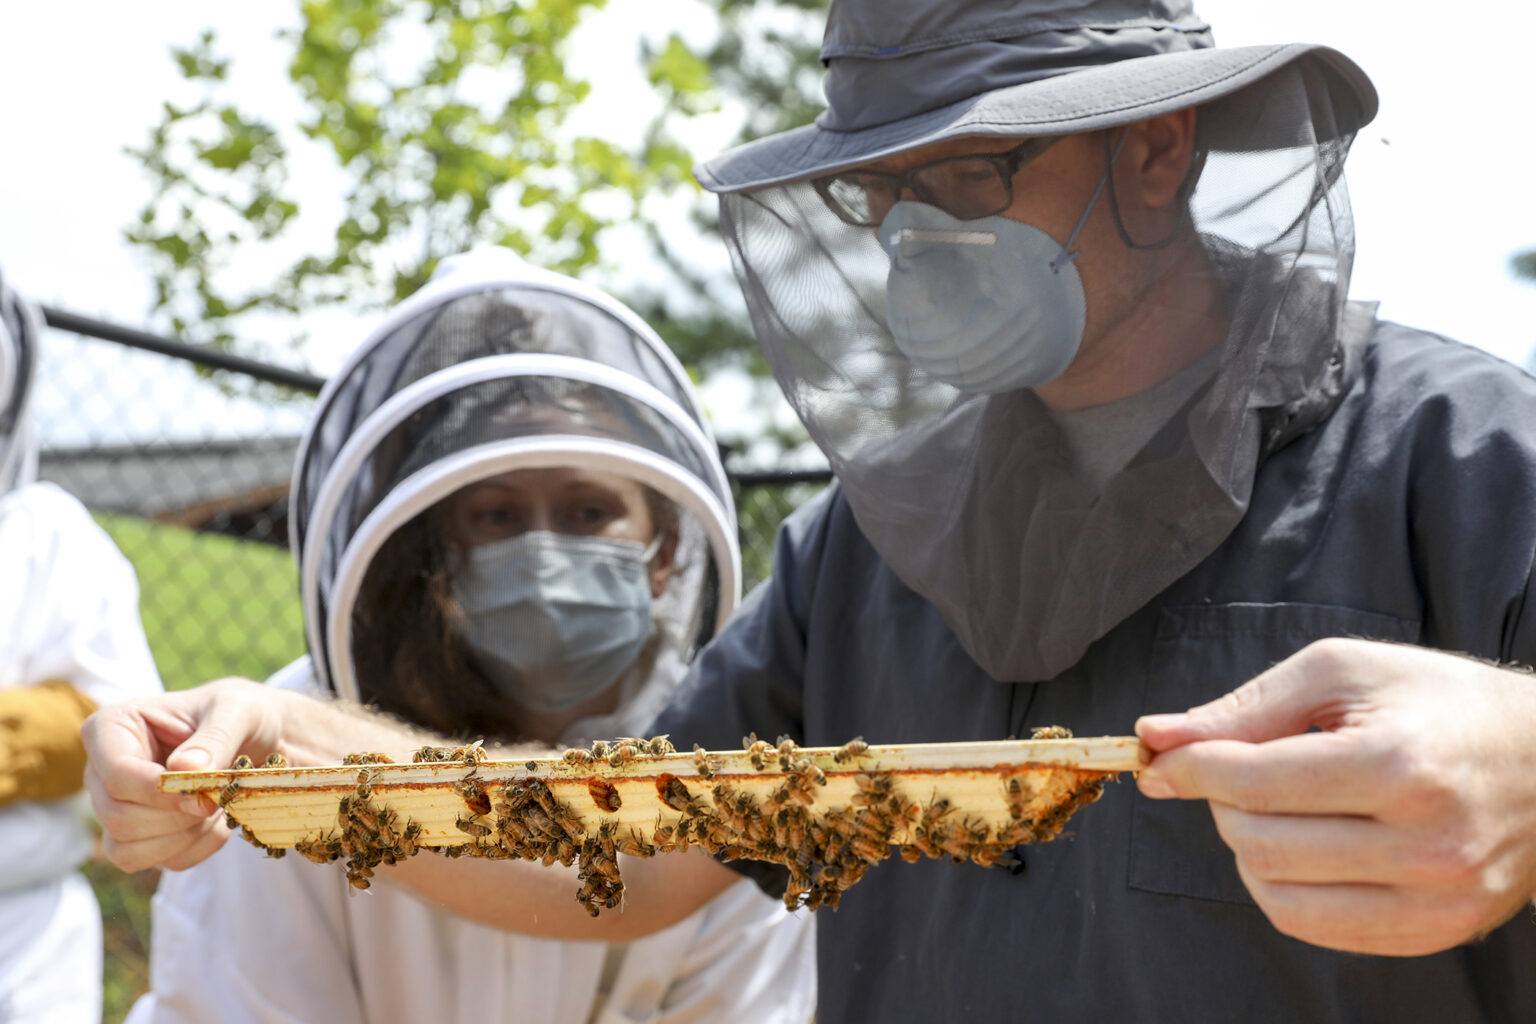 College of Veterinary Medicine residents Dr. Megan Partyka and Dr. Gregory Walth inspect a beehive frame. (Photo by Dorothy Kozlowski/UGA)